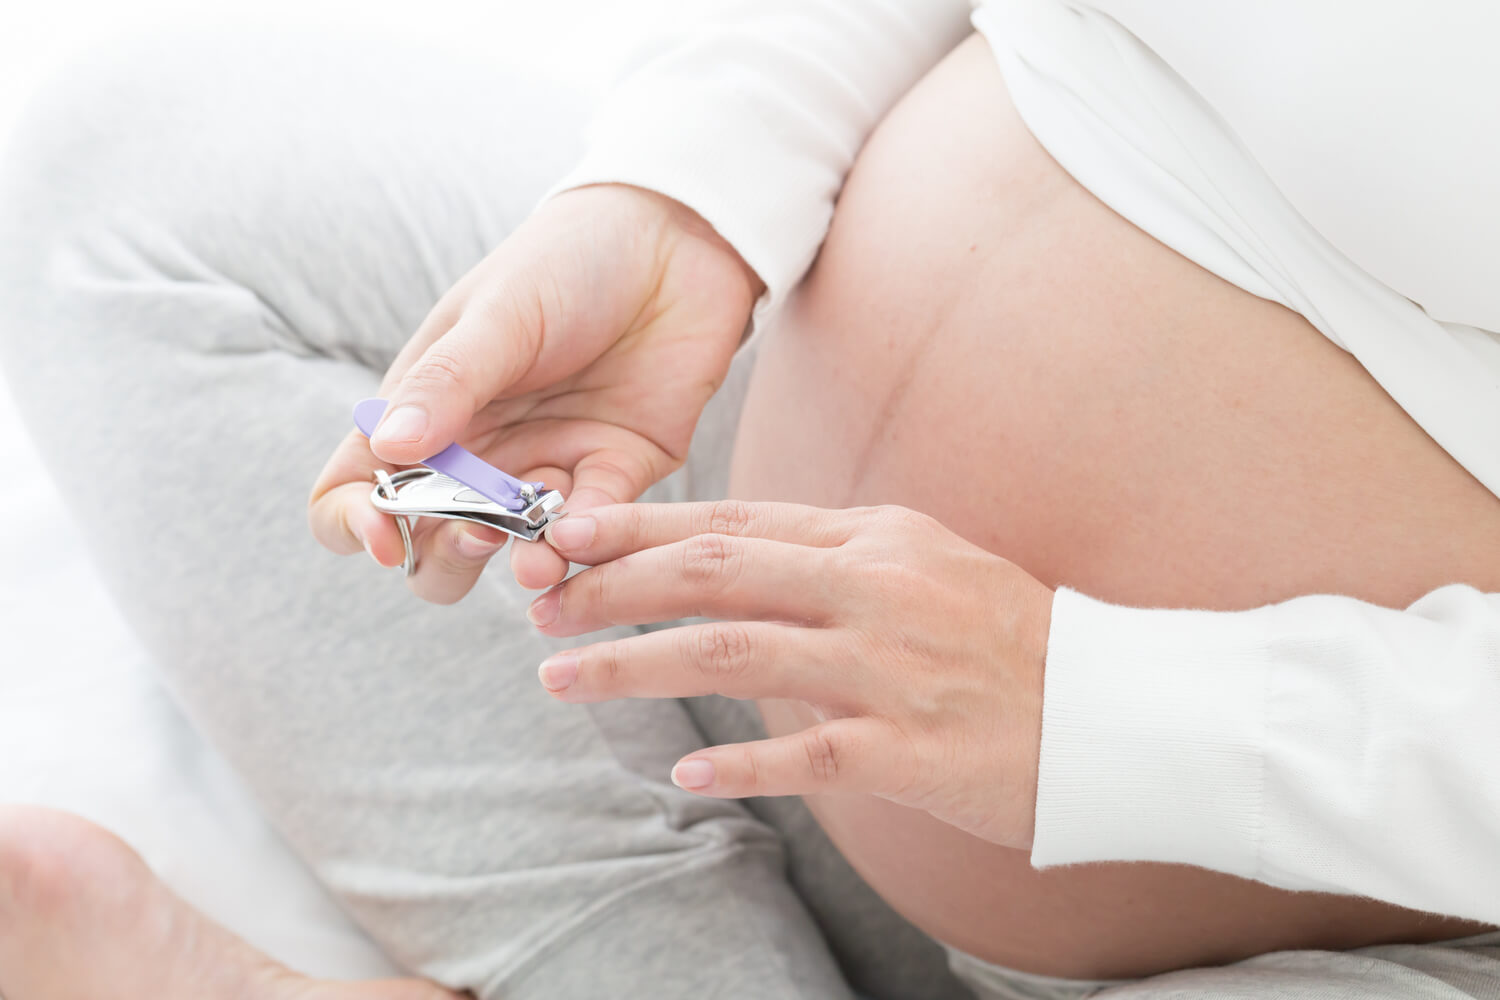 Nail Changes During Pregnancy - Causes and Treatment - Being The Parent